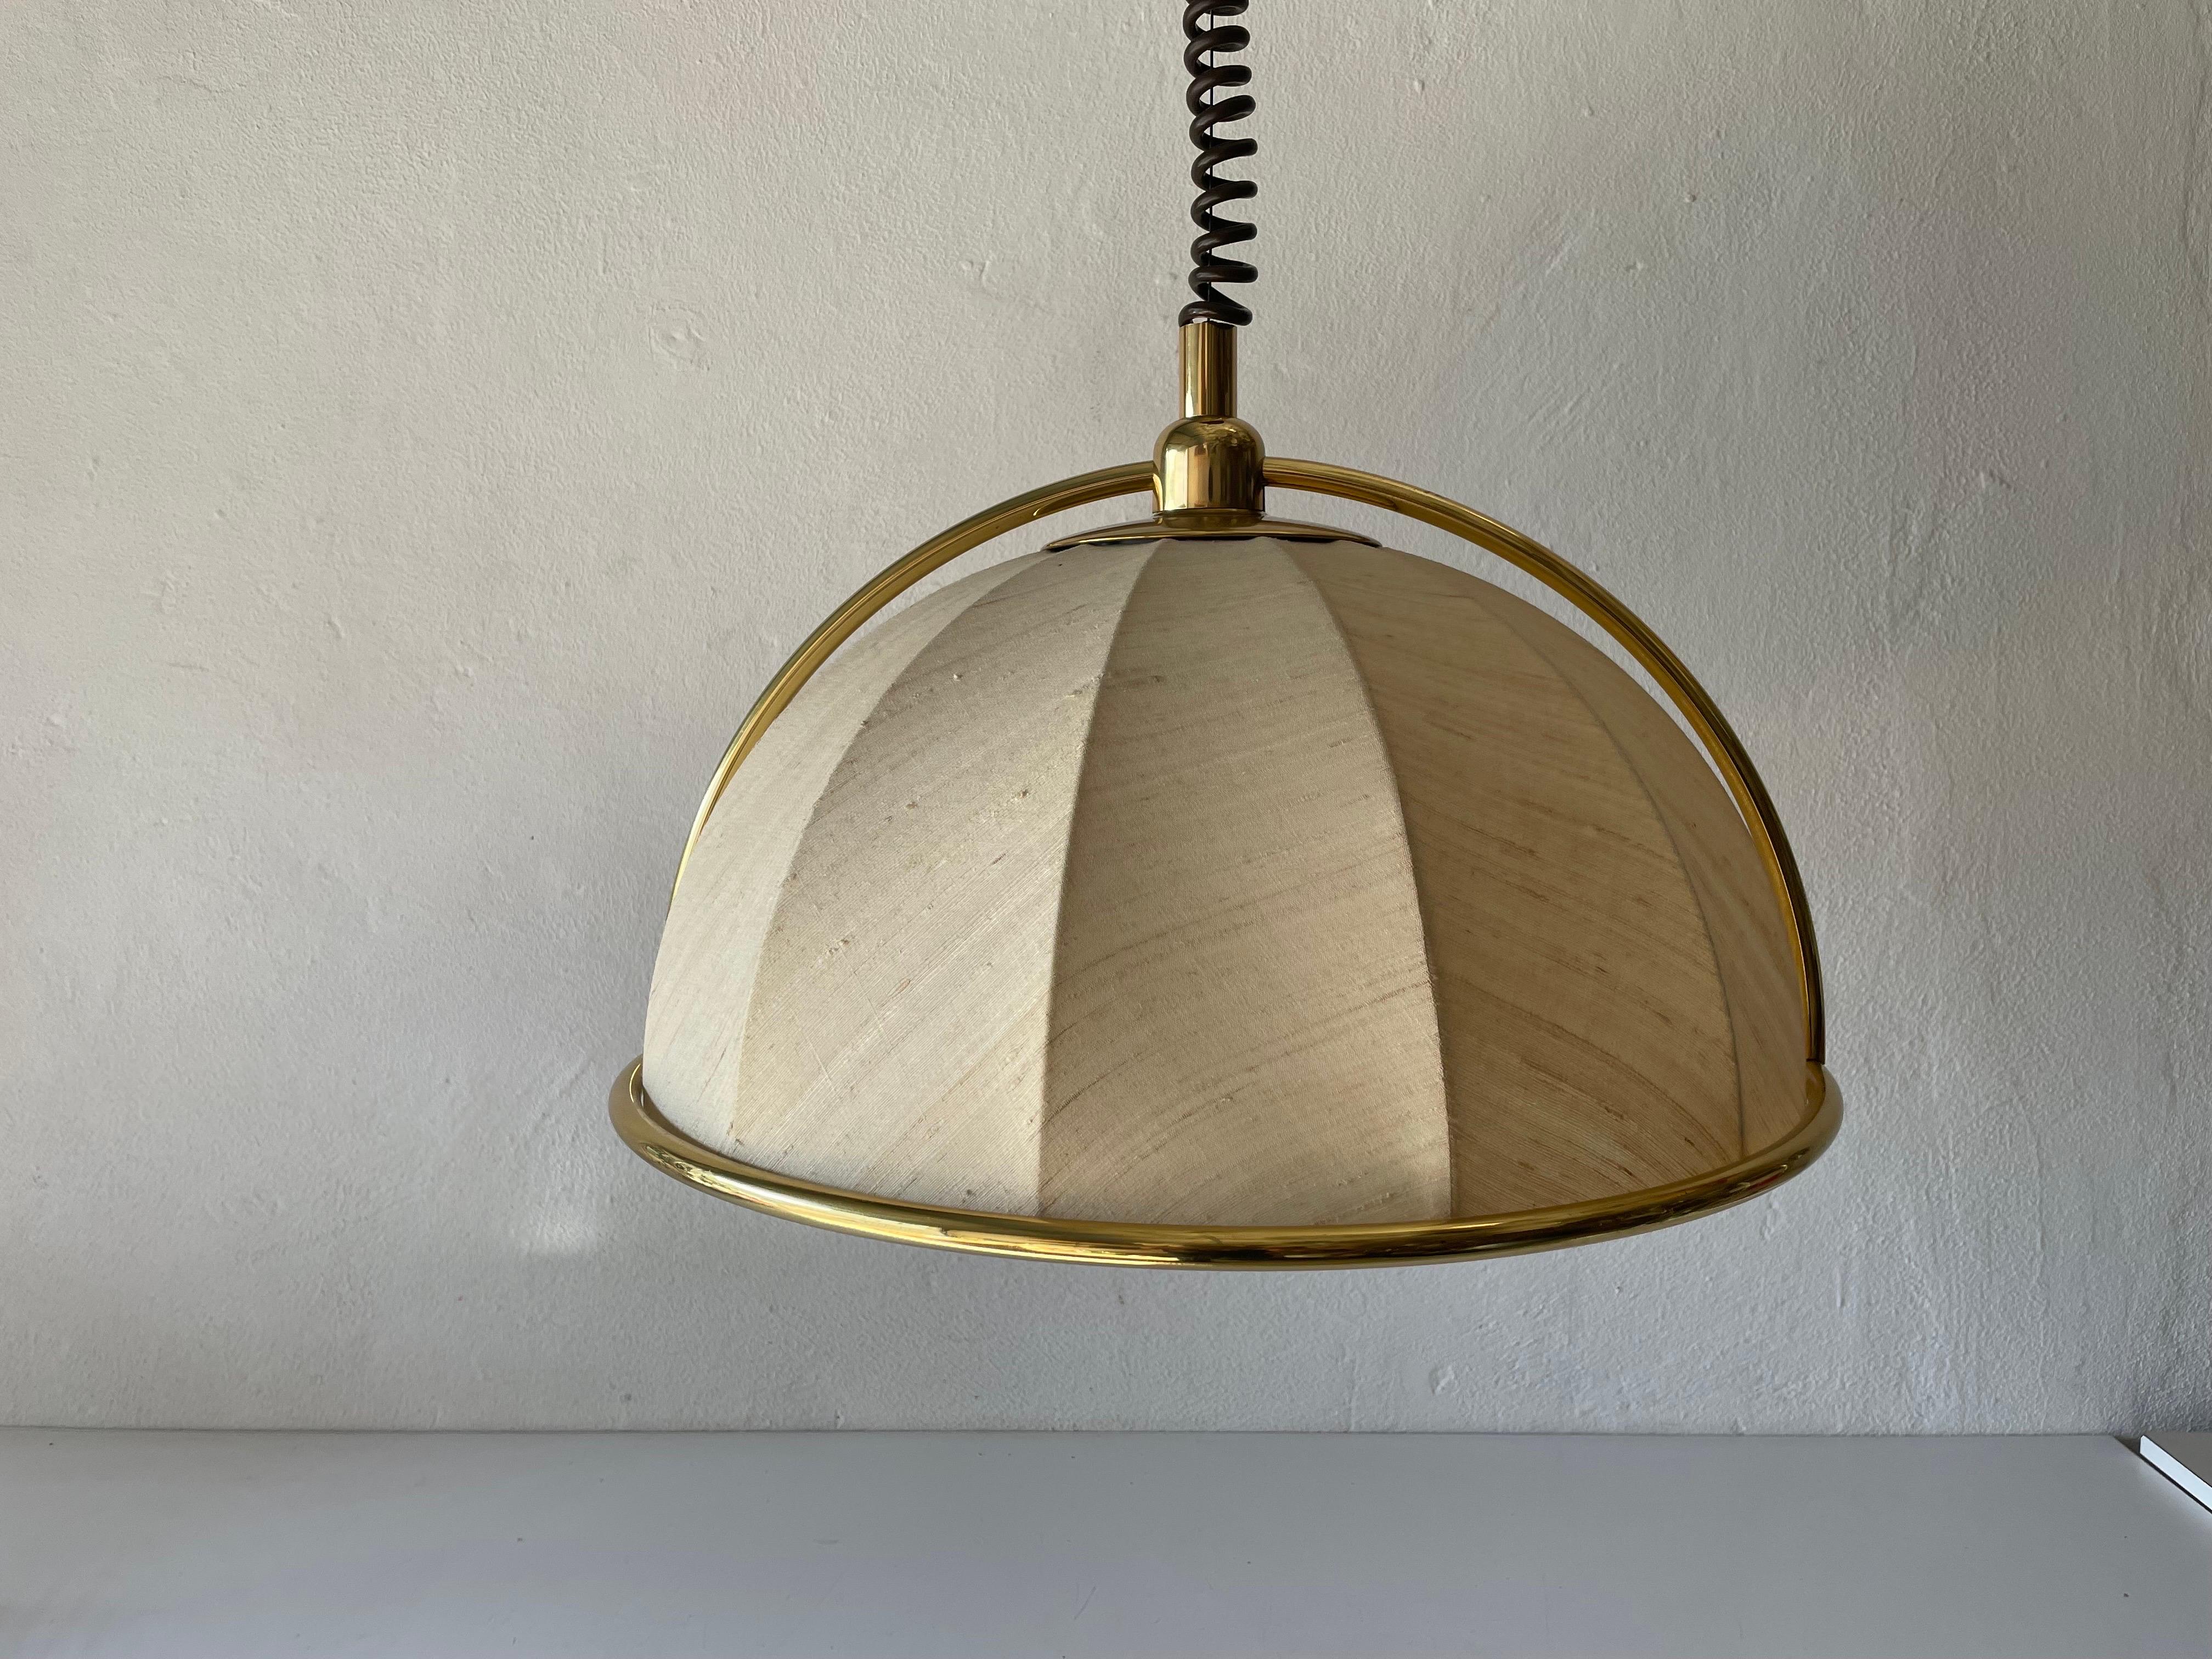 Late 20th Century Rare Brass & Fabric Shade Pendant Lamp by WKR, 1970s, Germany